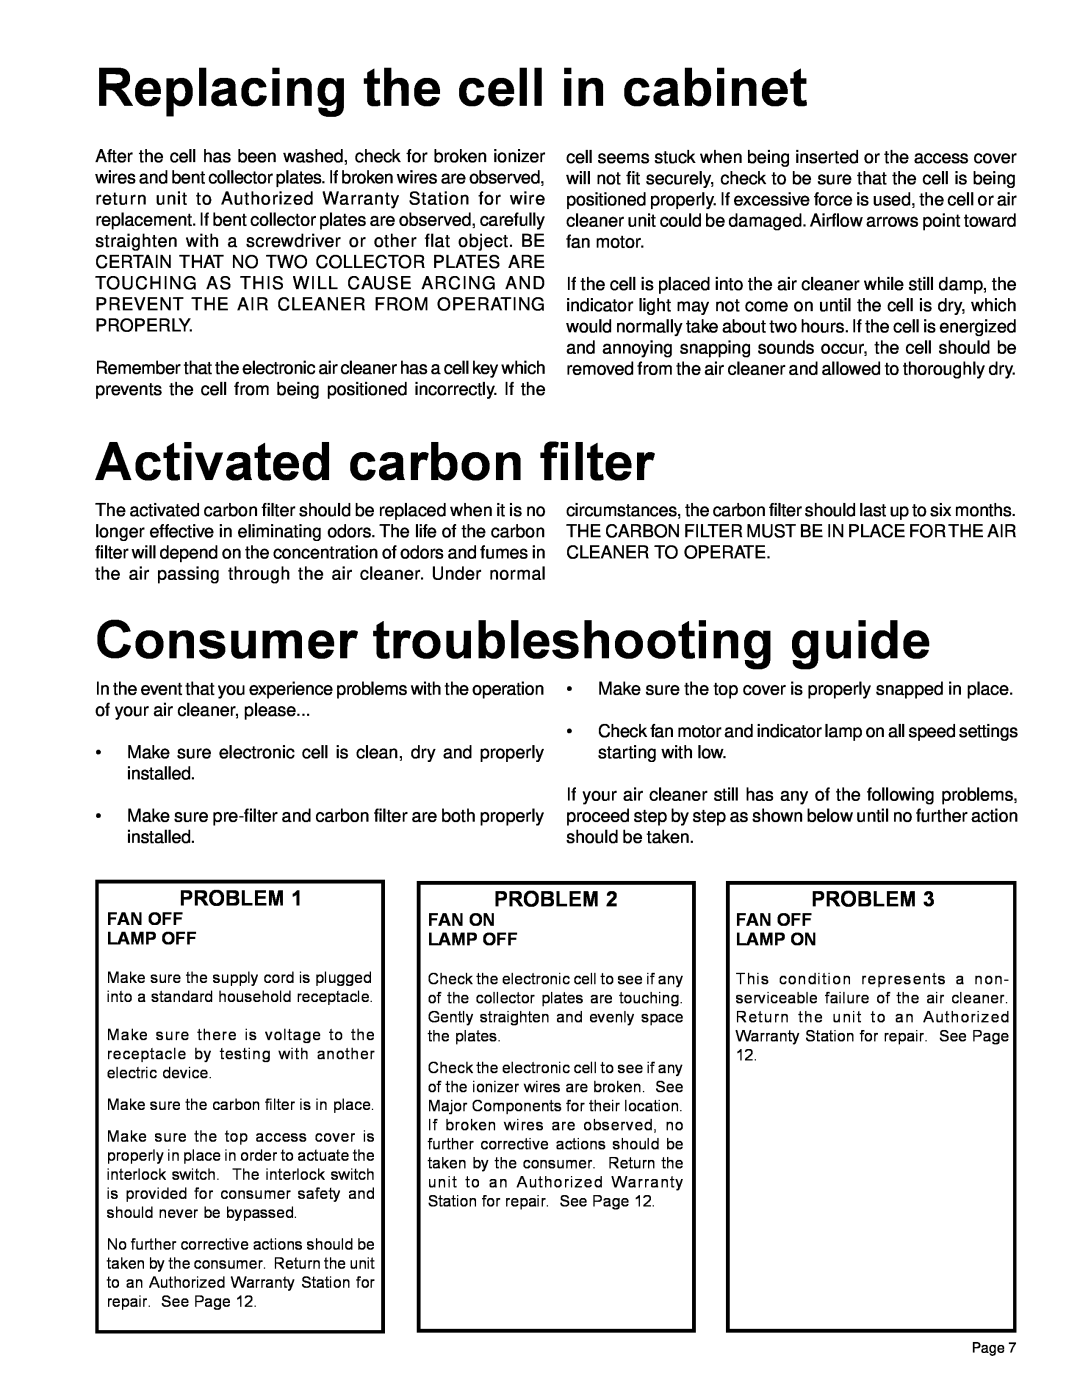 Friedrich C-90A manual Replacing the cell in cabinet, Activated carbon filter, Consumer troubleshooting guide, Problem 